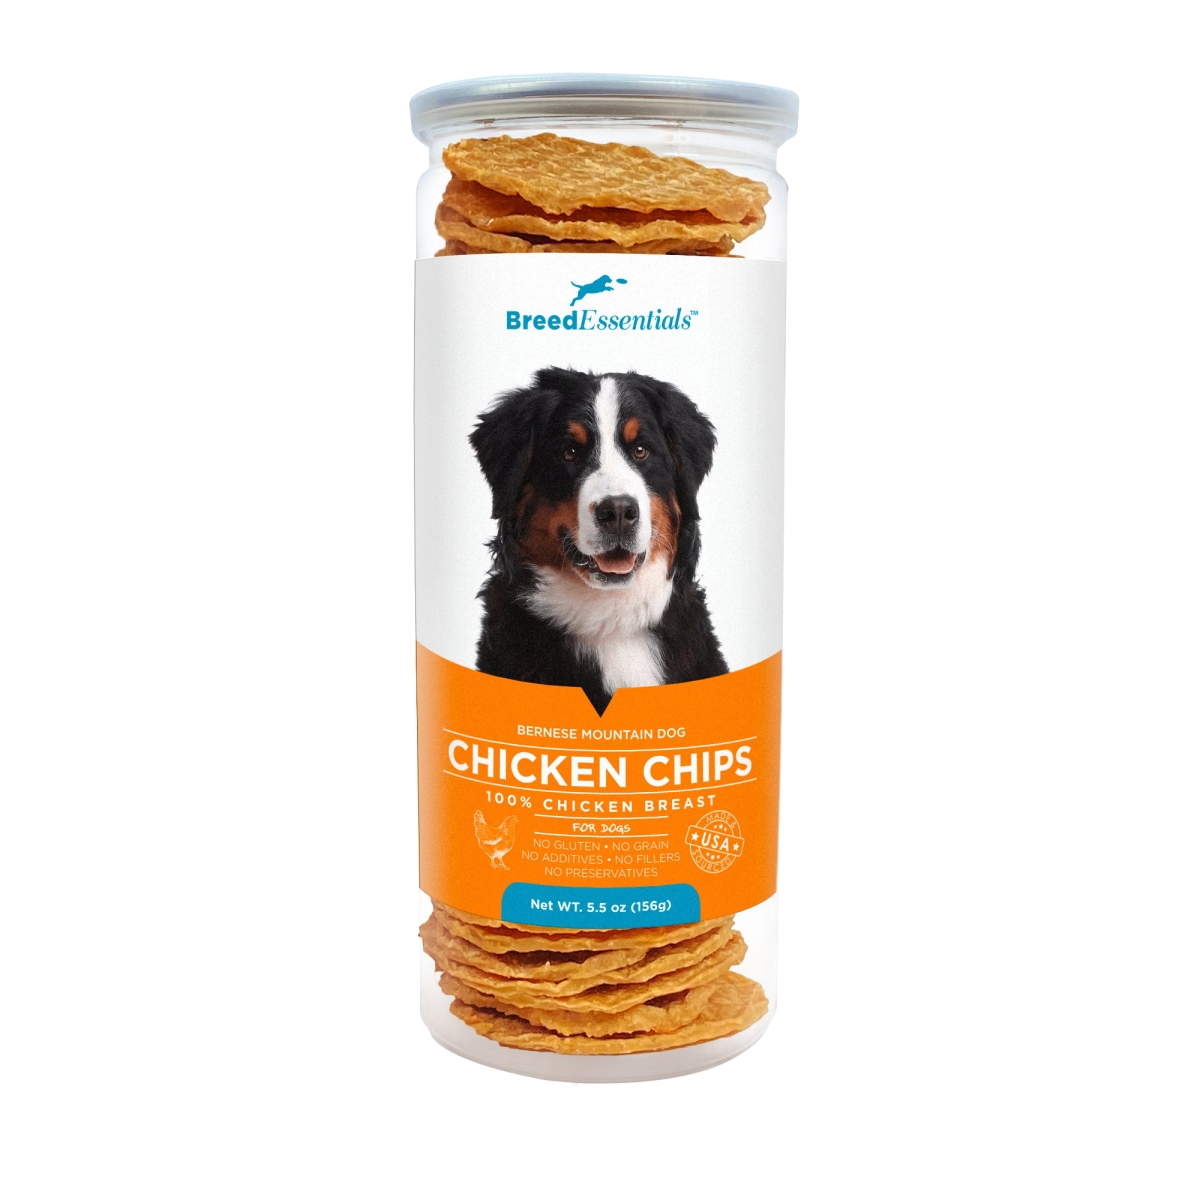 Picture of Breed Essentials 197247001676 5.5 oz Chicken Chips - Bernese Mountain Dog